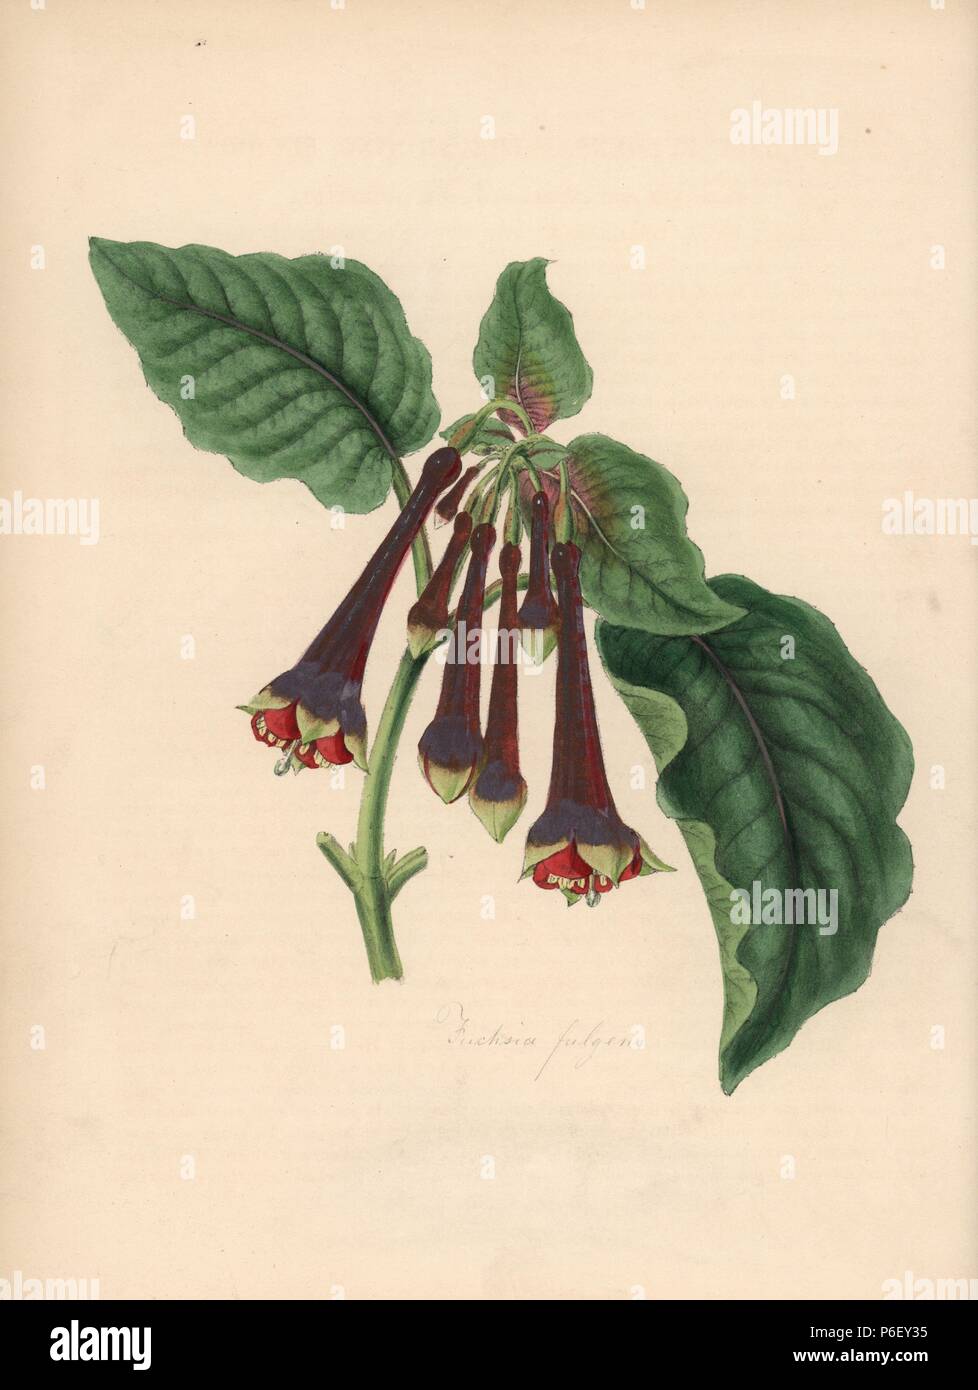 Fuchsia, Fuchsia fulgens. Handcoloured zincograph by C. Chabot drawn by Miss M. A. Burnett from her 'Plantae Utiliores: or Illustrations of Useful Plants,' Whittaker, London, 1842. Miss Burnett drew the botanical illustrations, but the text was chiefly by her late brother, British botanist Gilbert Thomas Burnett (1800-1835). Stock Photo